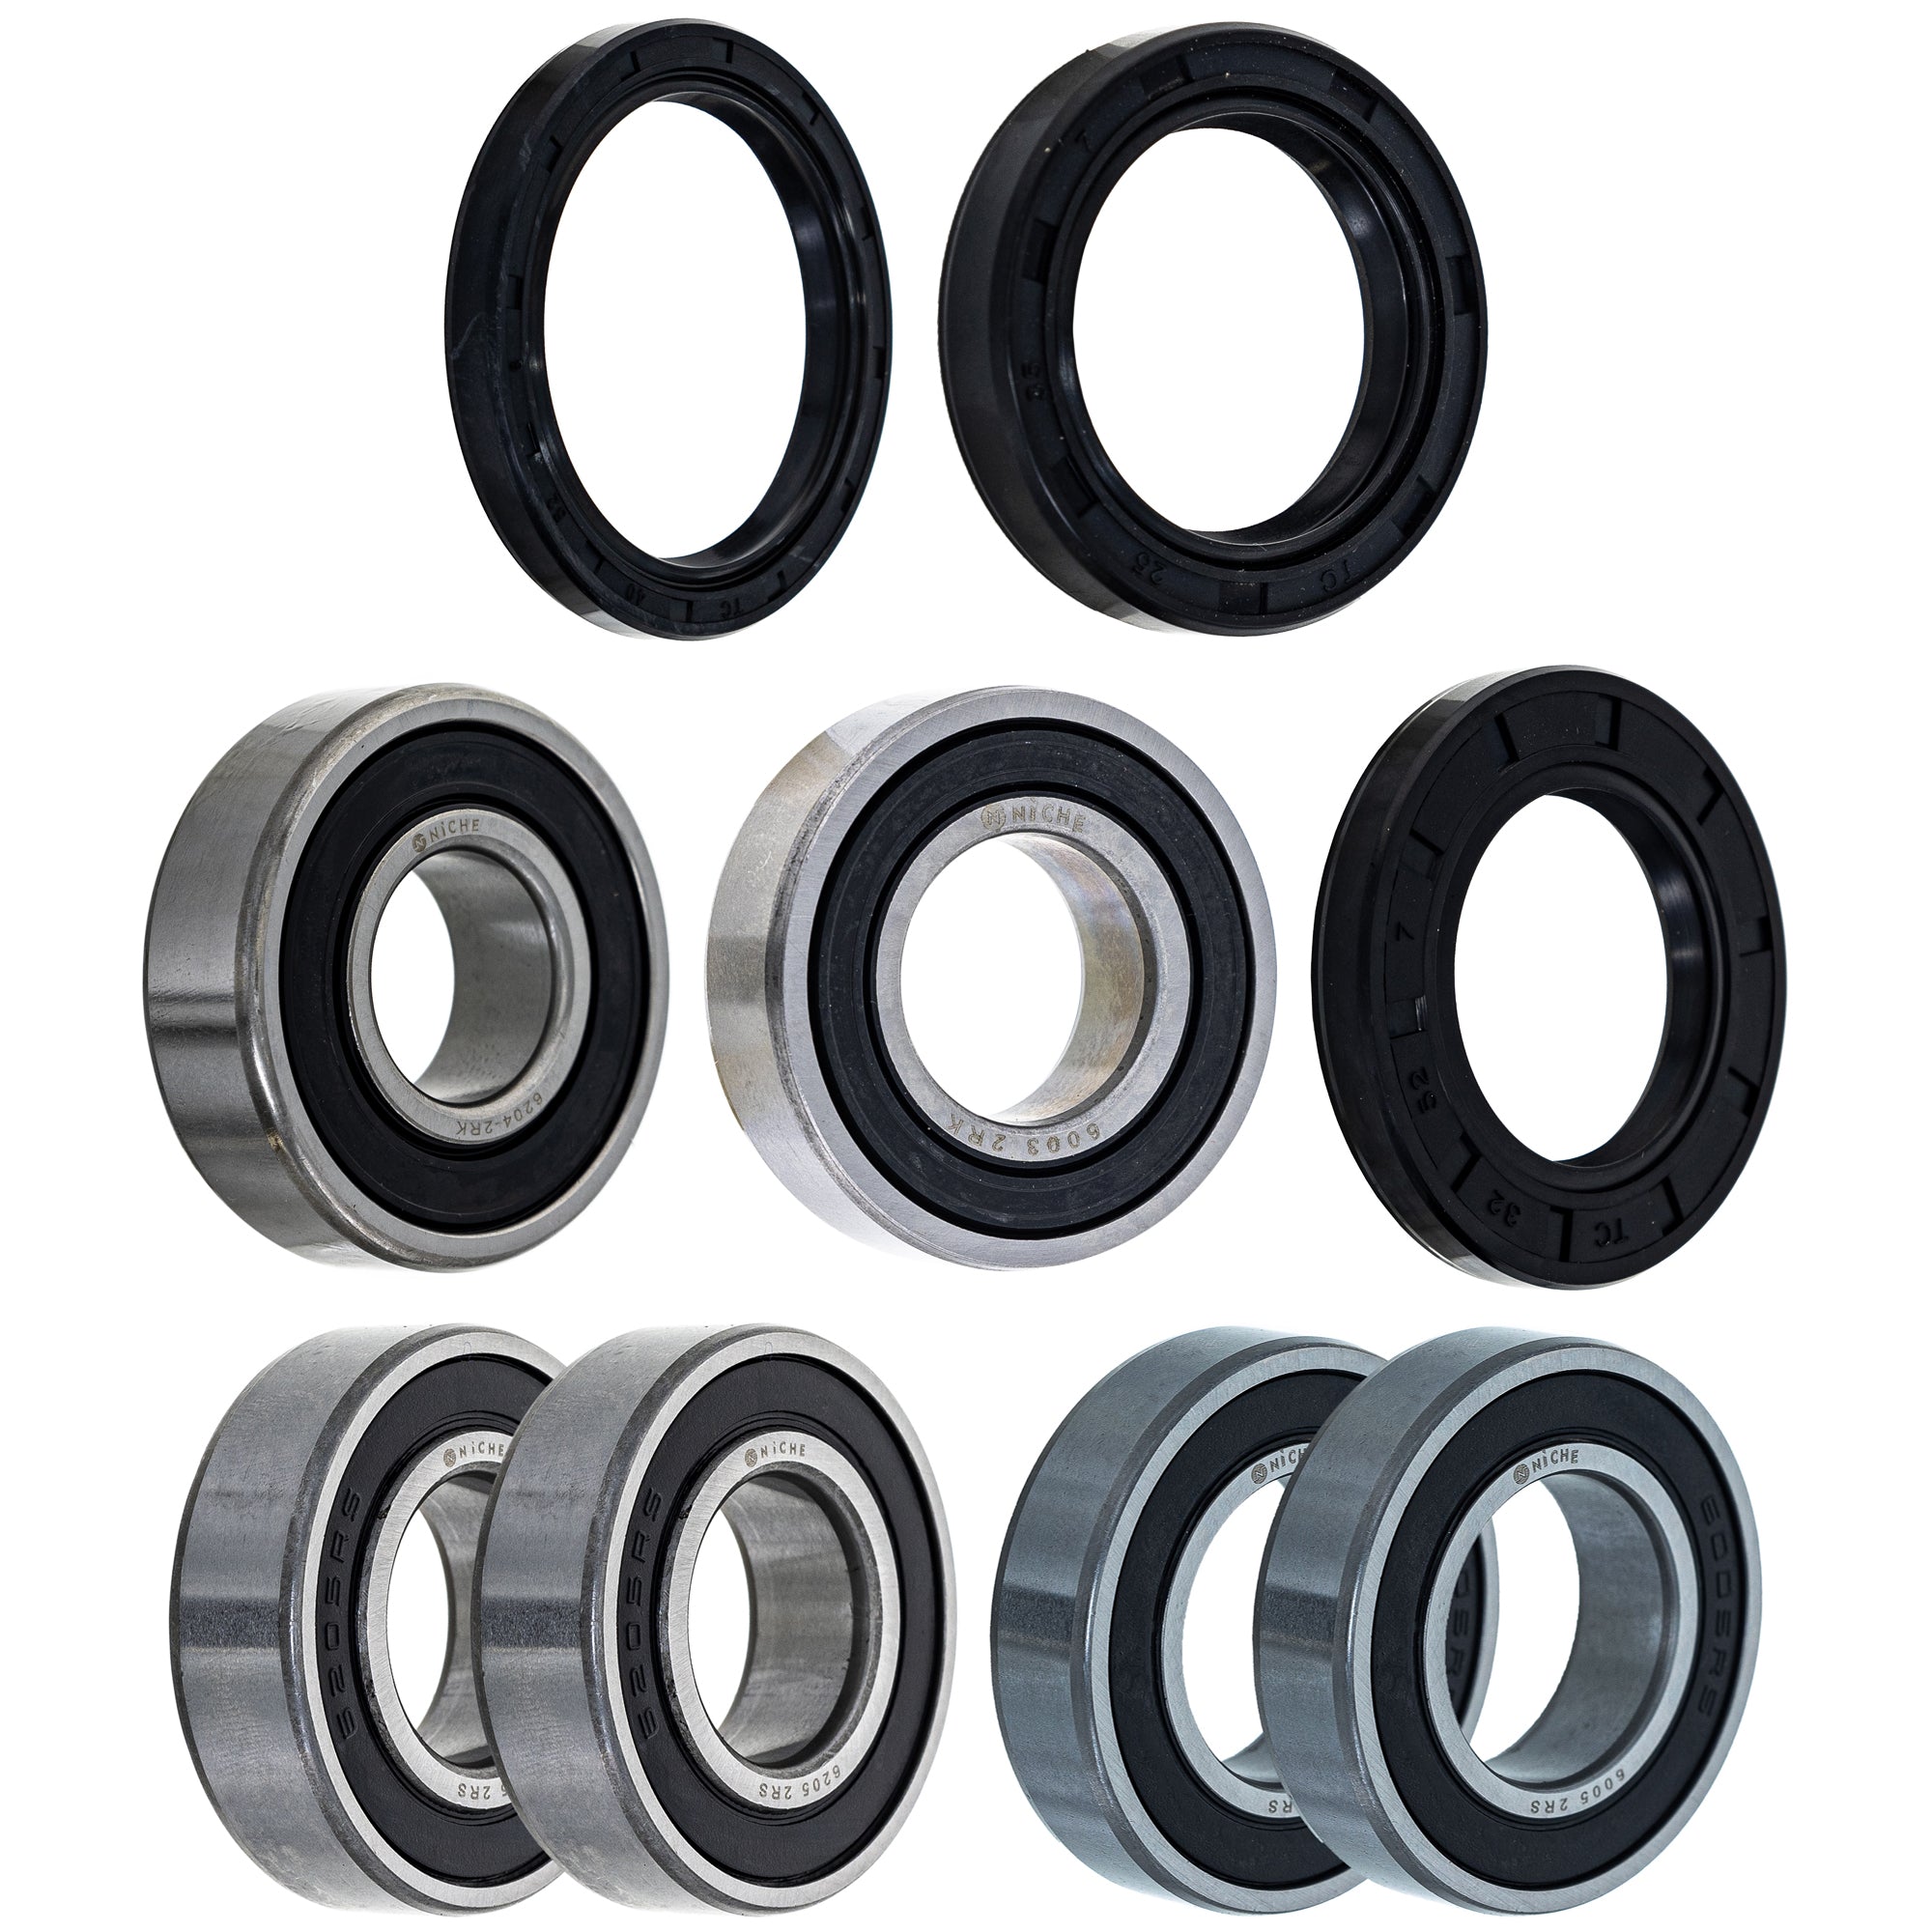 Wheel Bearing Seal Kit for zOTHER Ref No 500 NICHE MK1008678